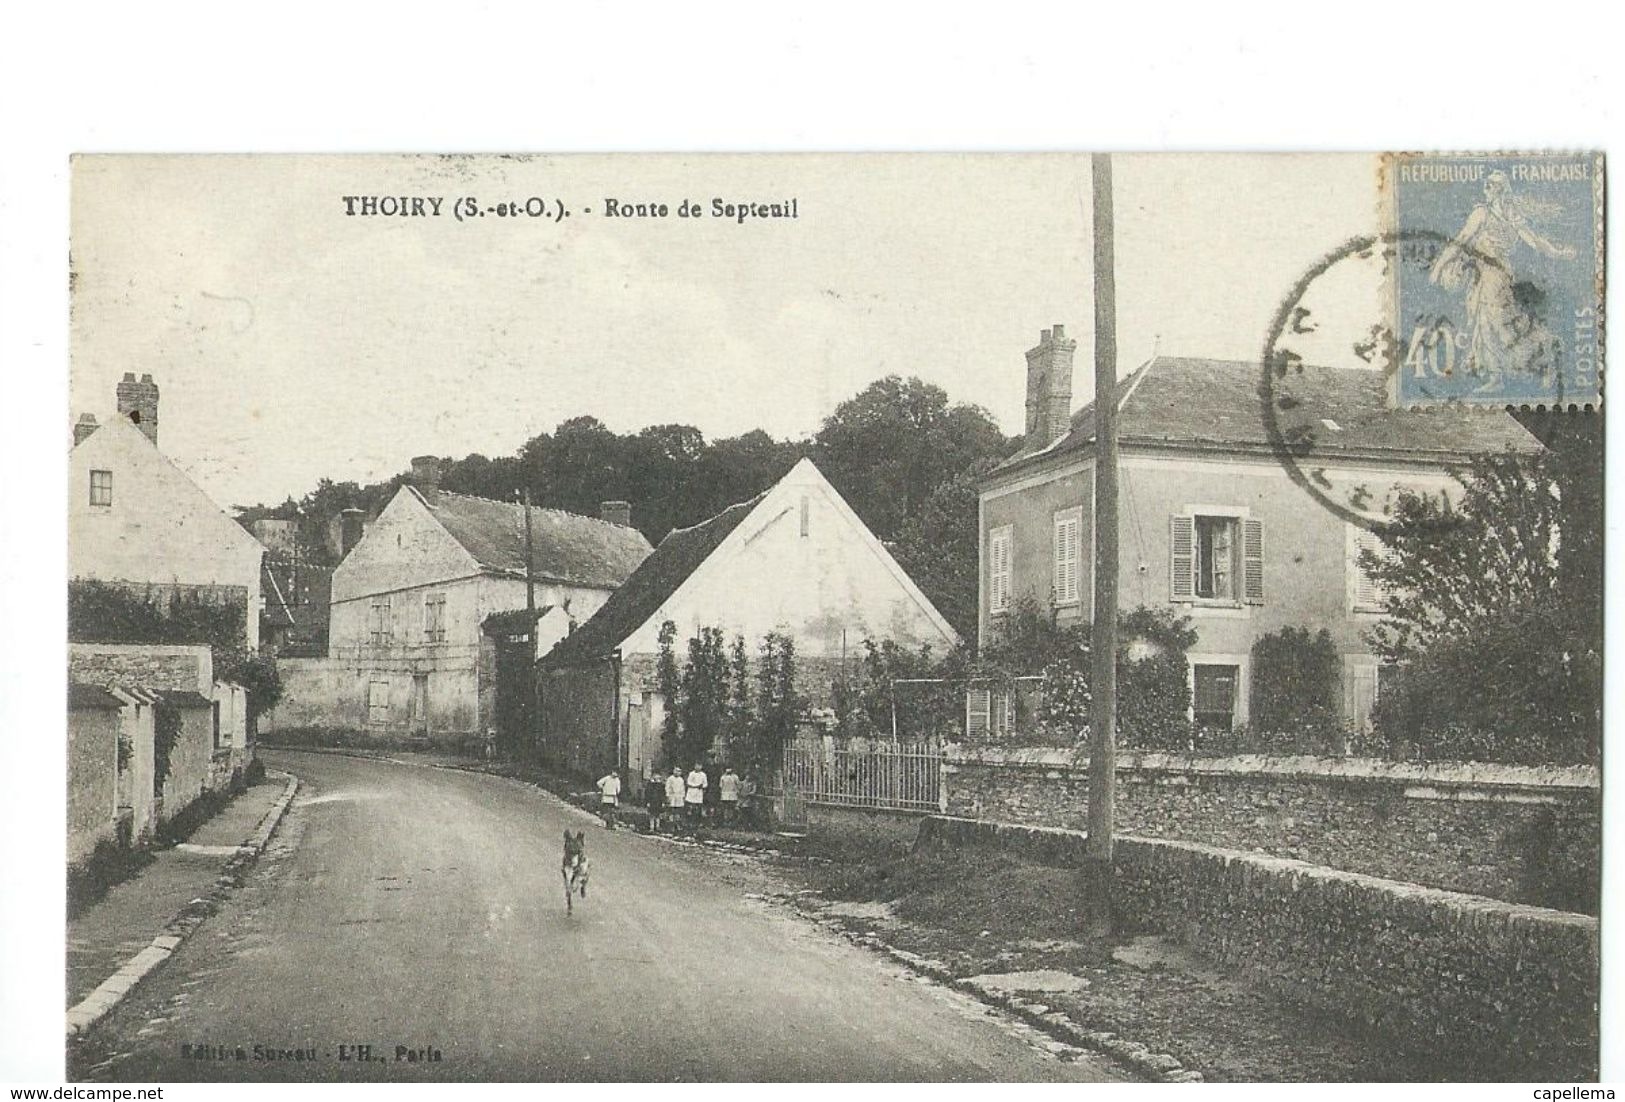 THOIRY - ROUTE DE SEPTEUIL - Thoiry